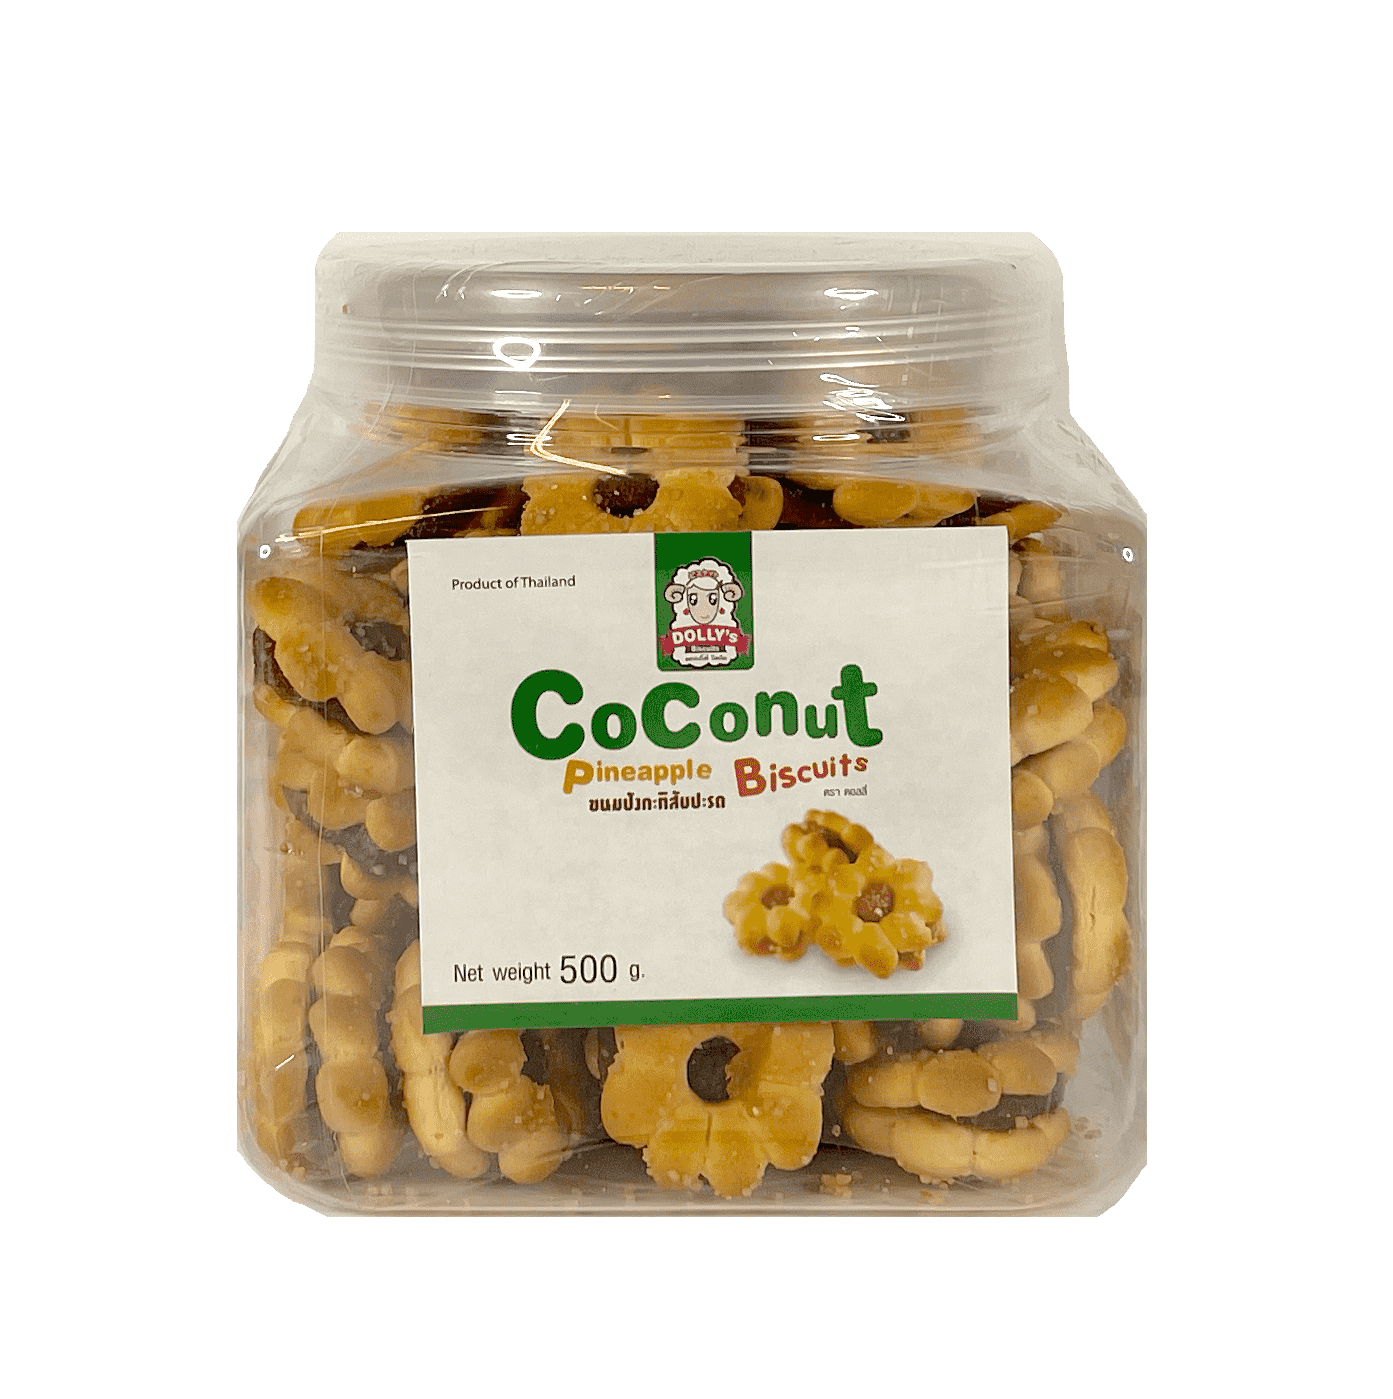 Best Before: 2022.10.06 Coconut Pineapple Biscuit 500g Dollys Thailand